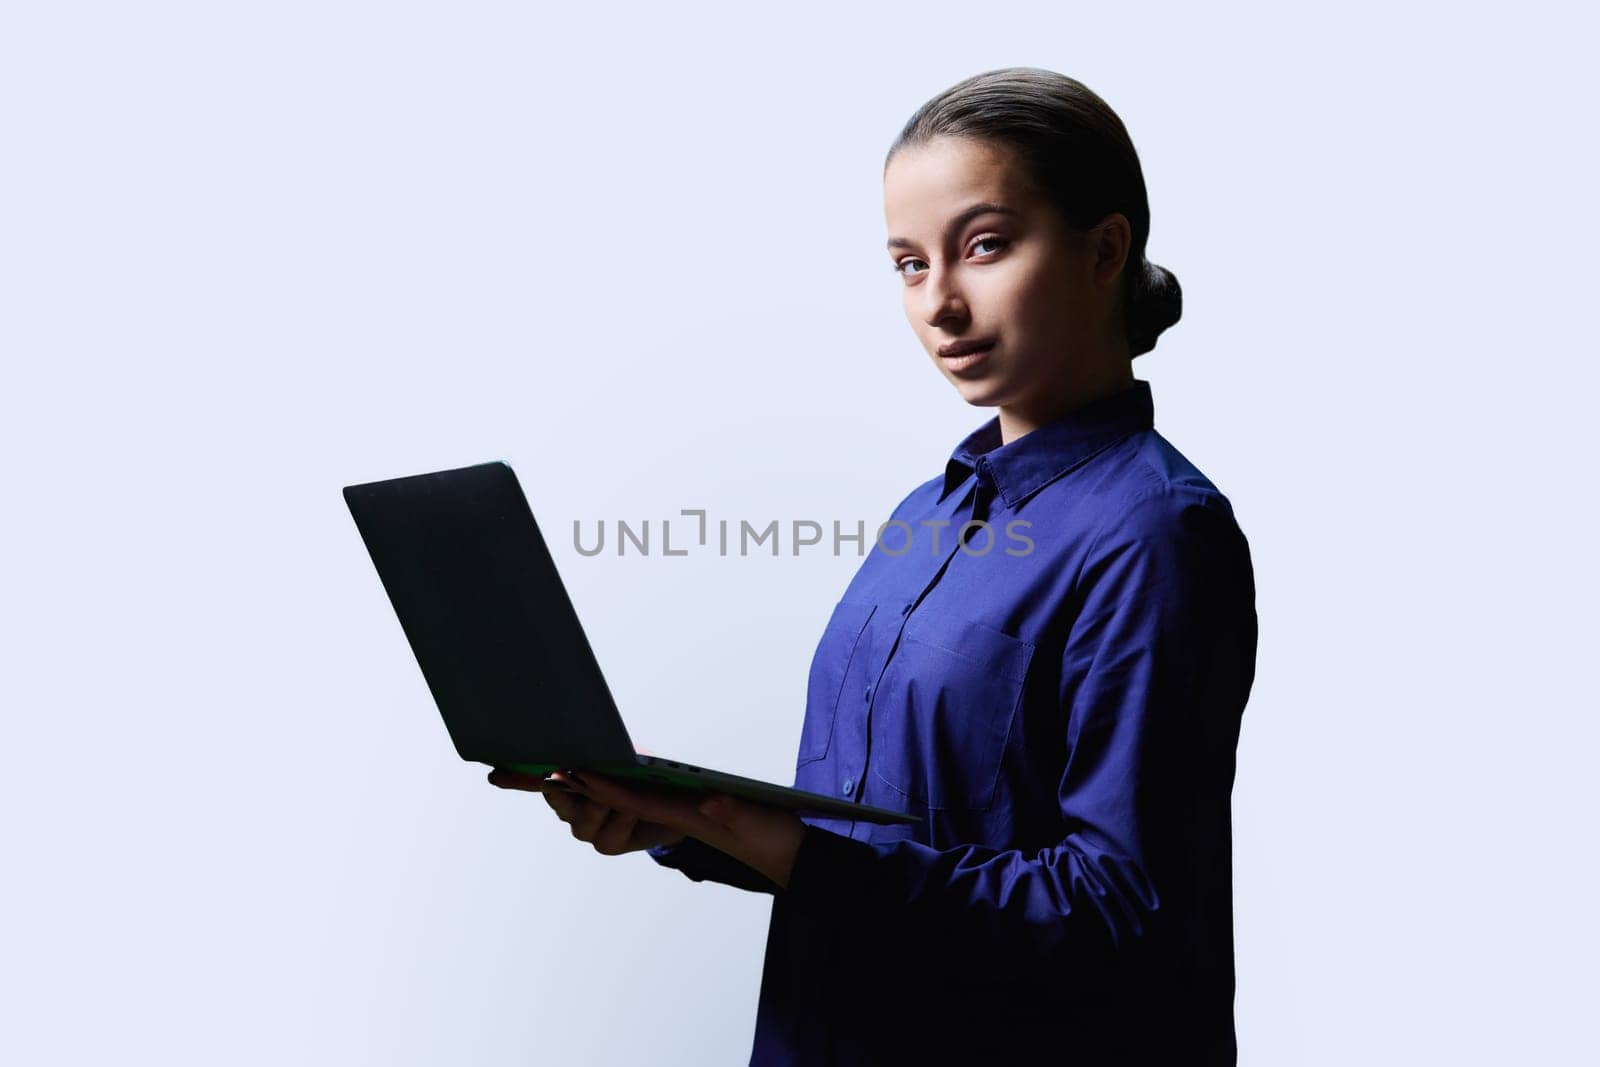 Teenage girl high school student using laptop looking at camera on white background. Education, learning, technology, adolescence concept